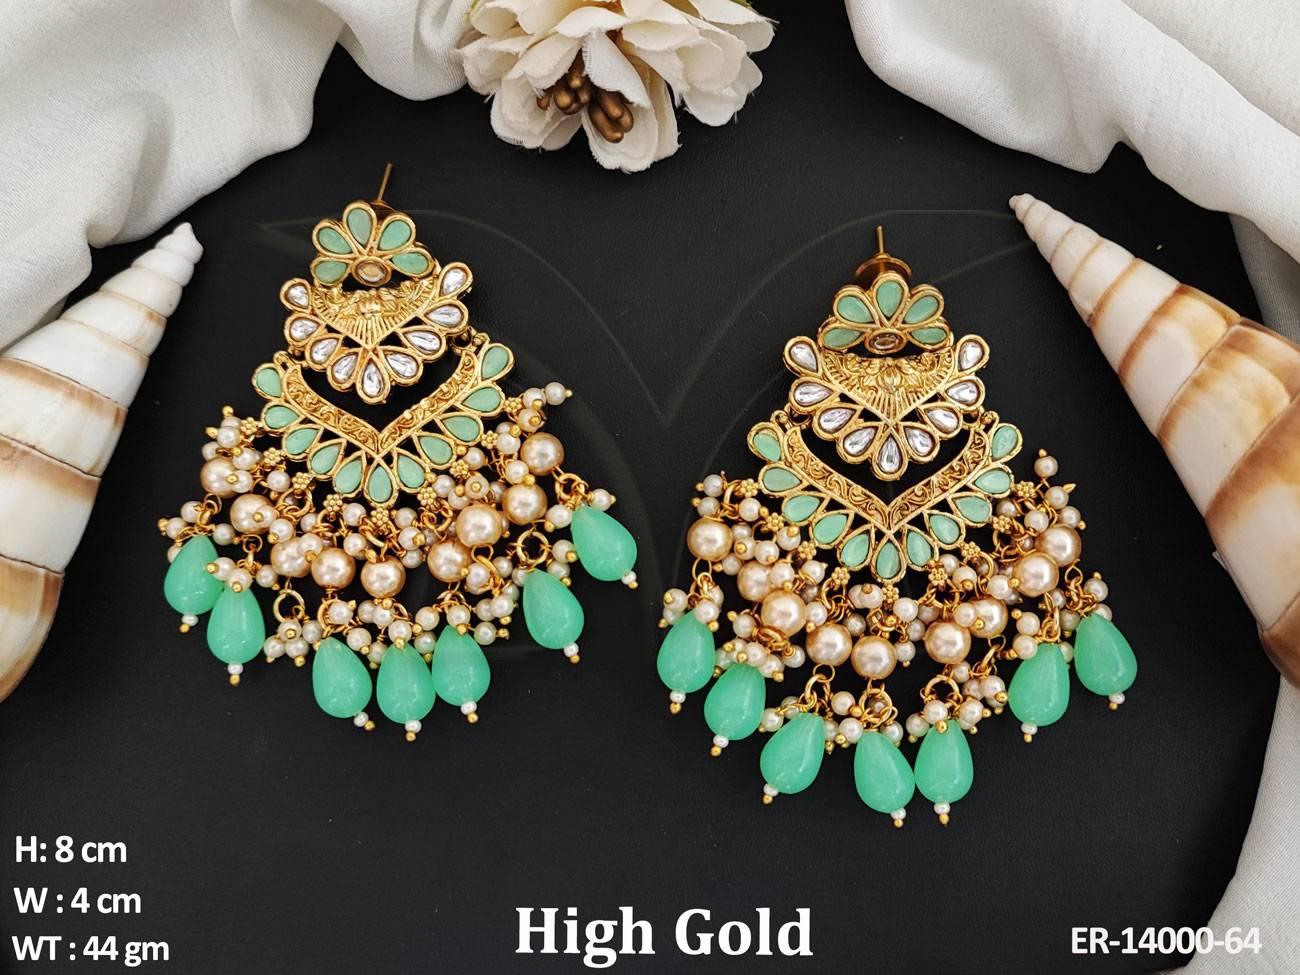 Expertly crafted with High Gold Polish, these Antique Dangler Earrings are the perfect addition to any party wear ensemble.